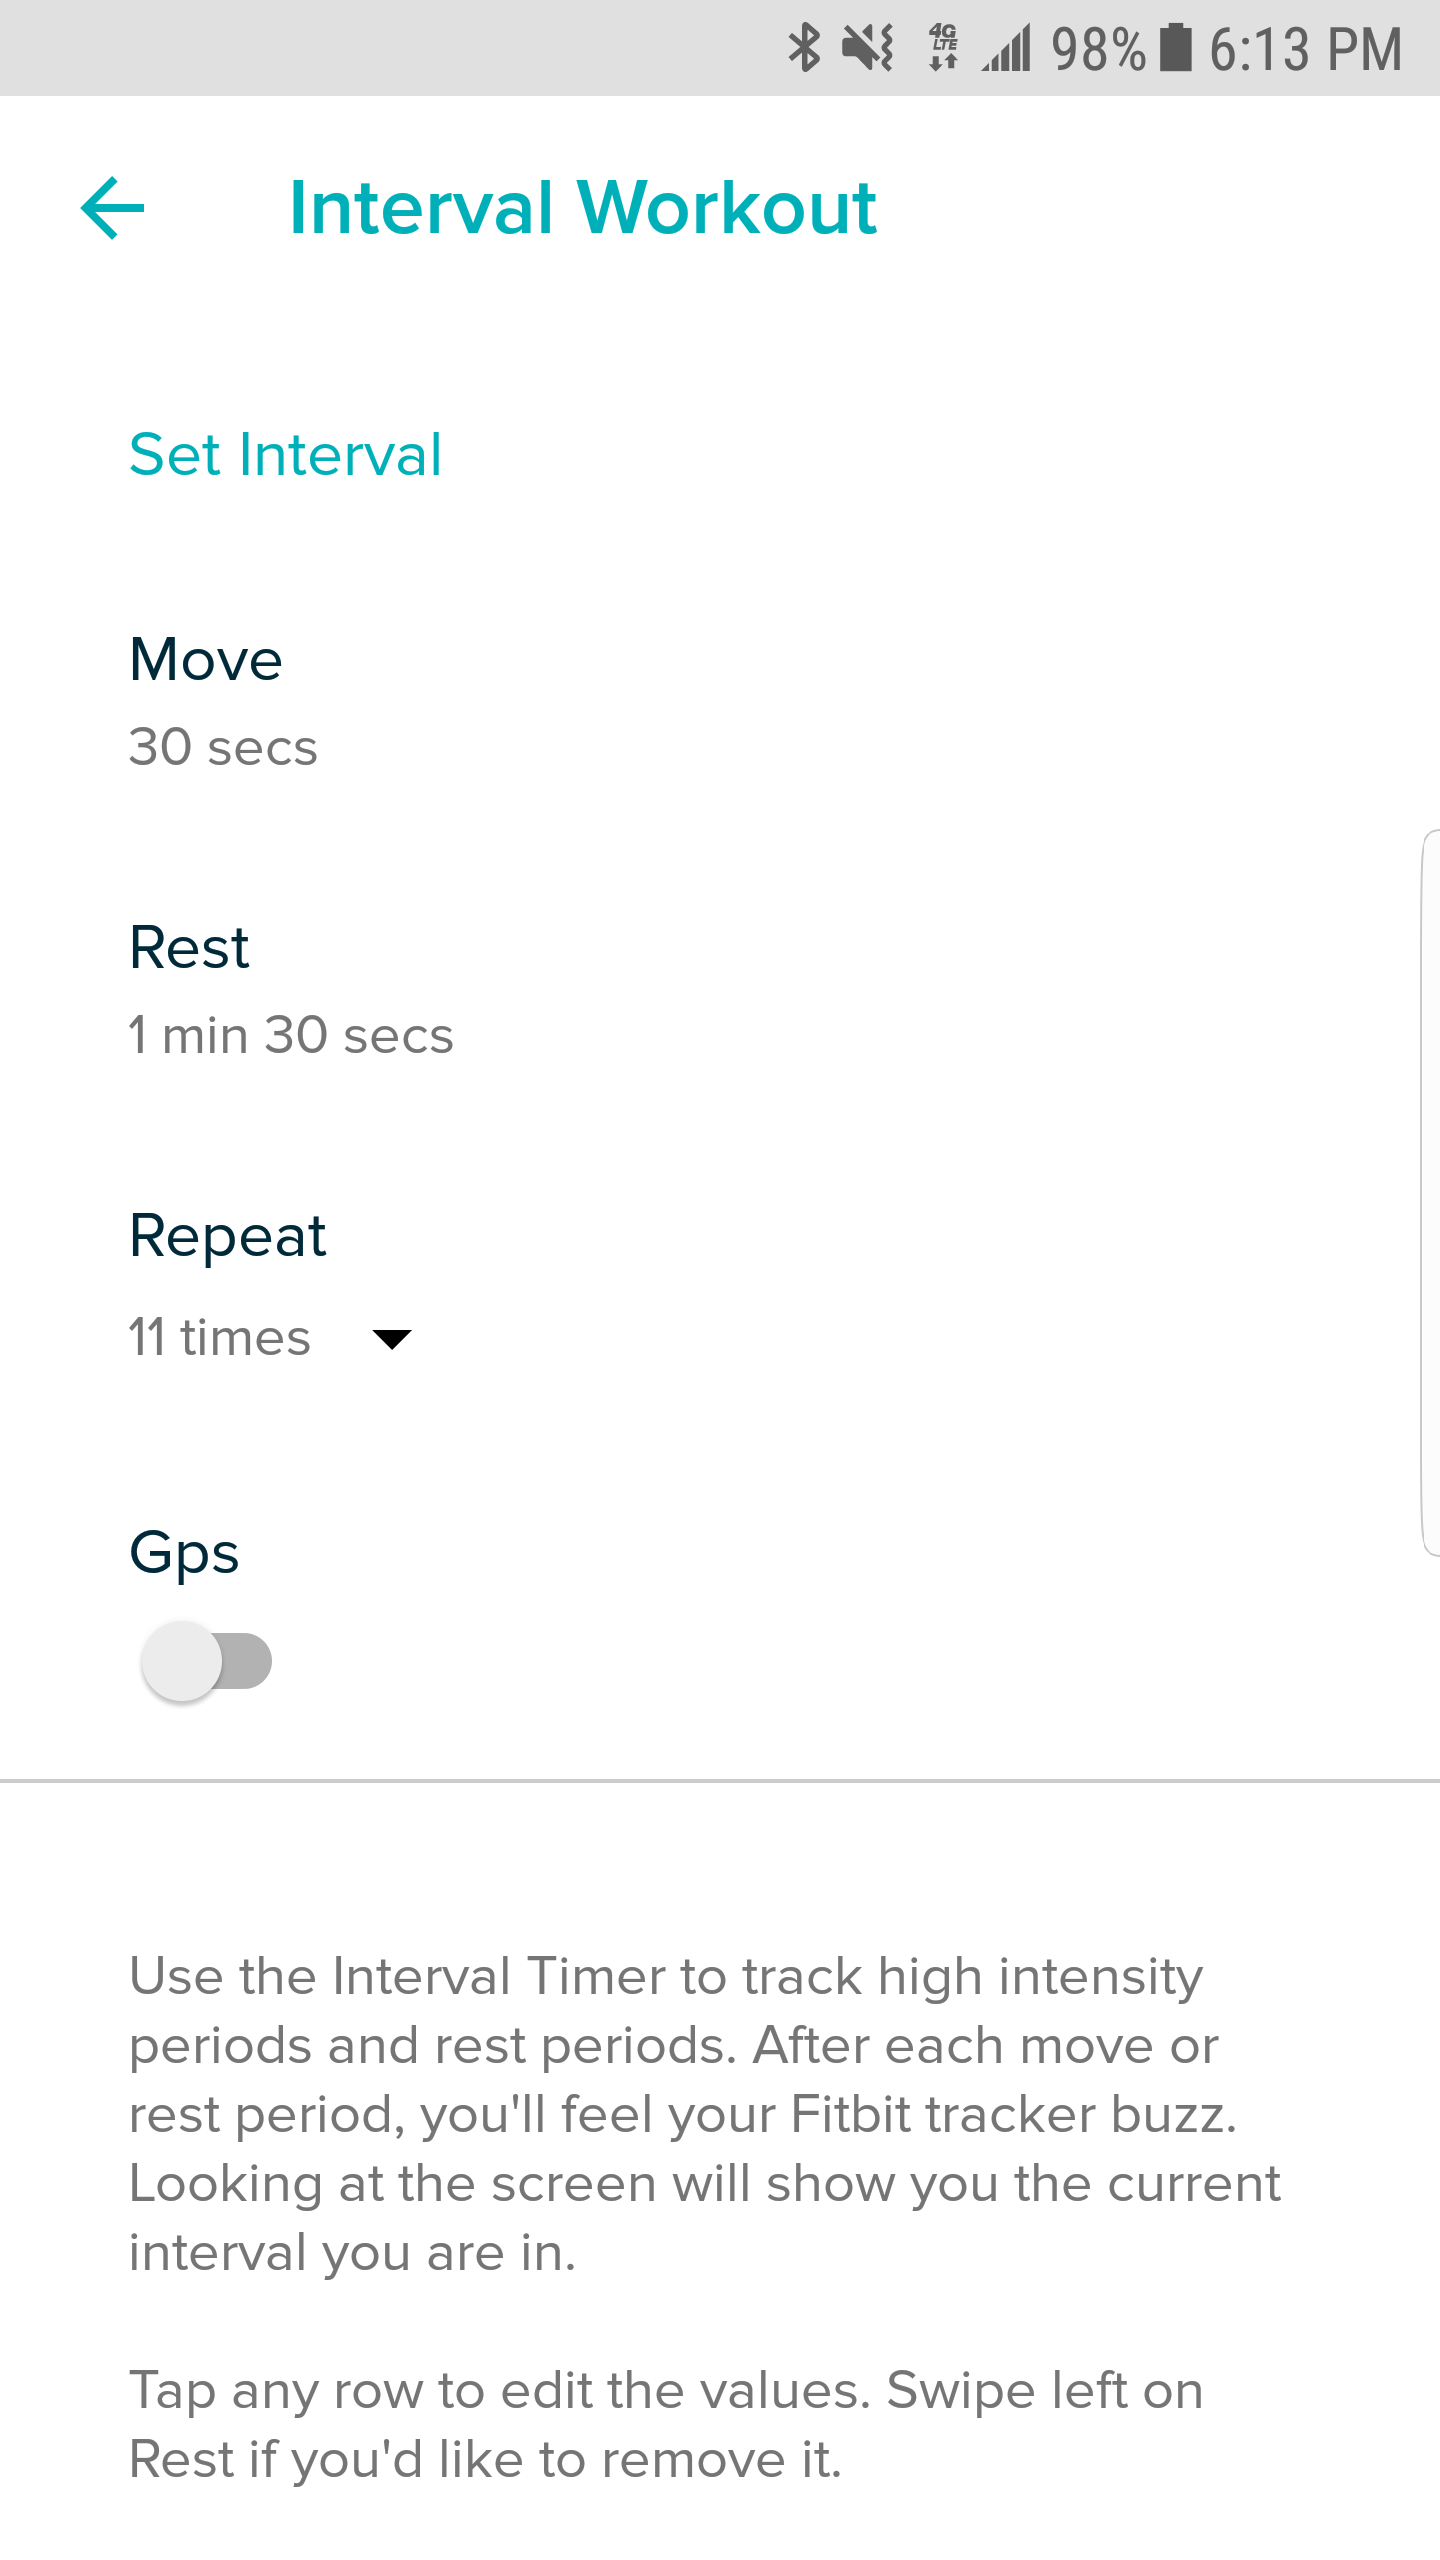 Does the Ionic have interval timer 